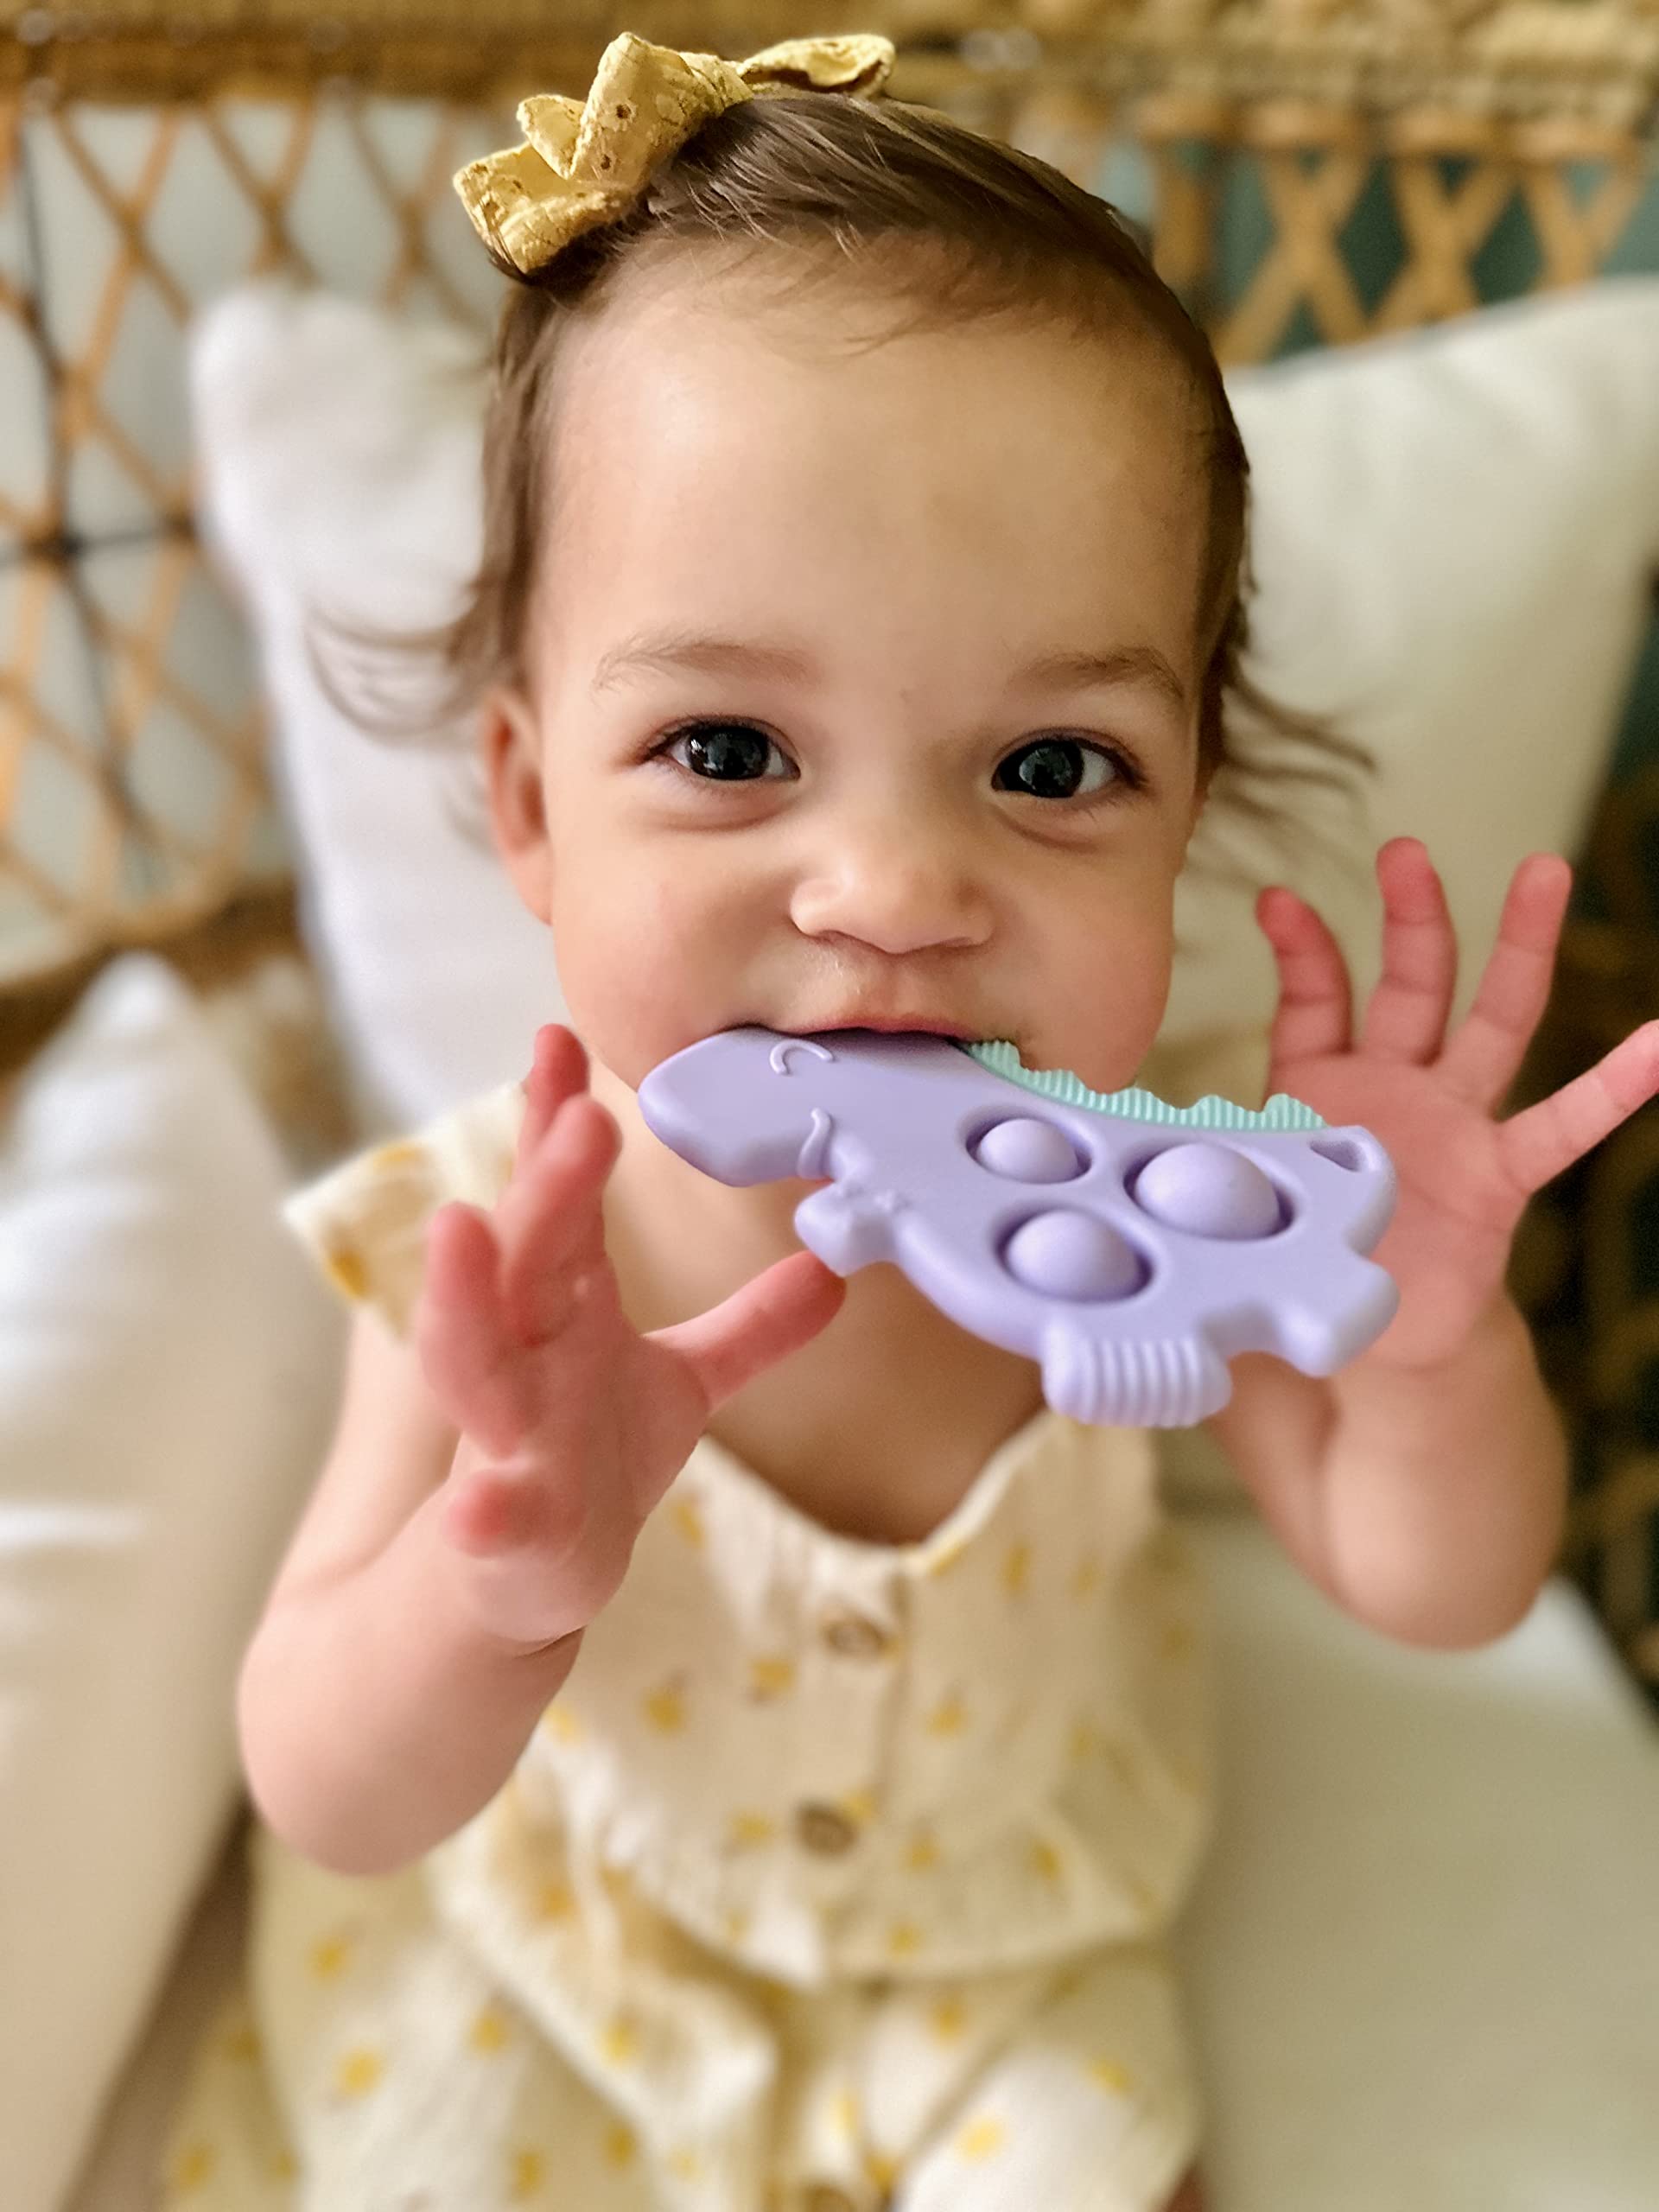 Itzy Ritzy Sensory Popper Toy - Itzy Pop Toy Features Raised Textures to Soothe Sore Gums; Relieves Stress and Improves Fine Motor Skills; Can Attach to a Bag or Pacifier Strap; Lilac Dinosaur